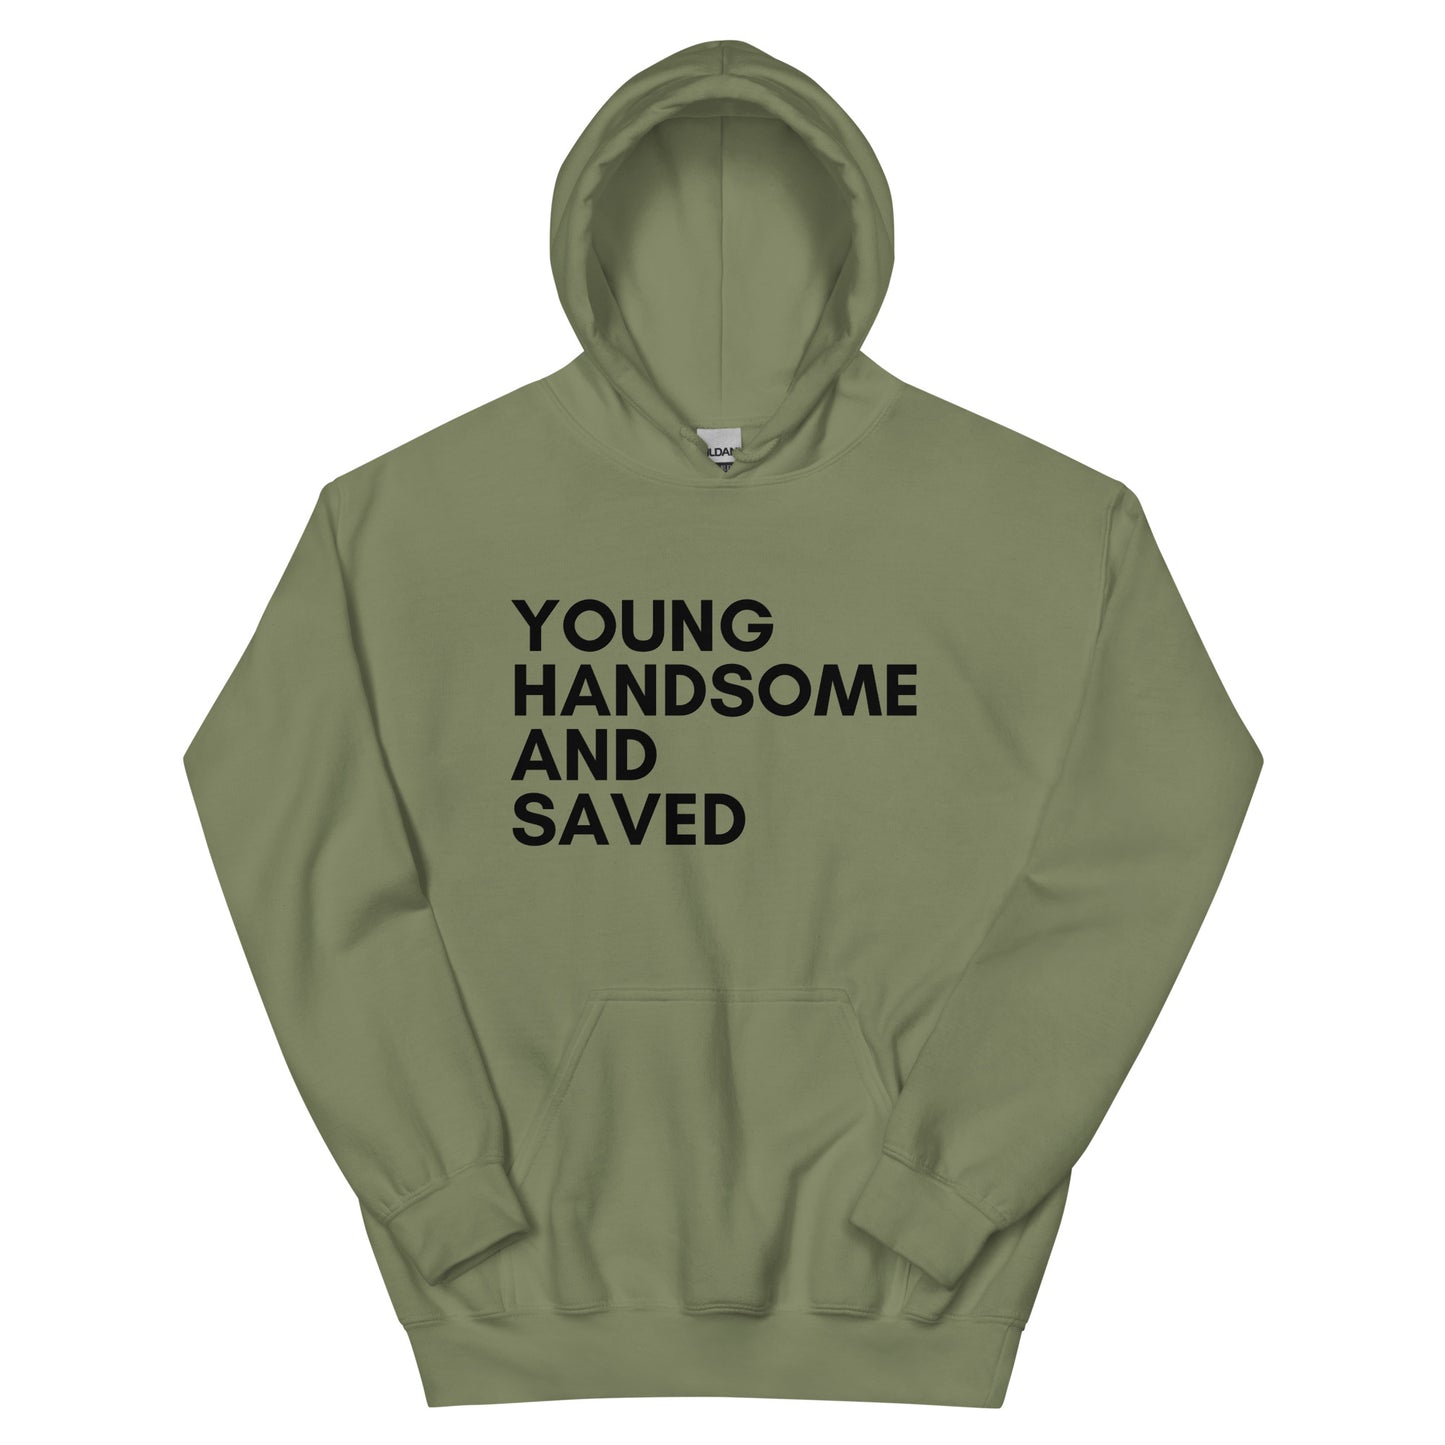 "Young Handsome & Saved" Hoodie